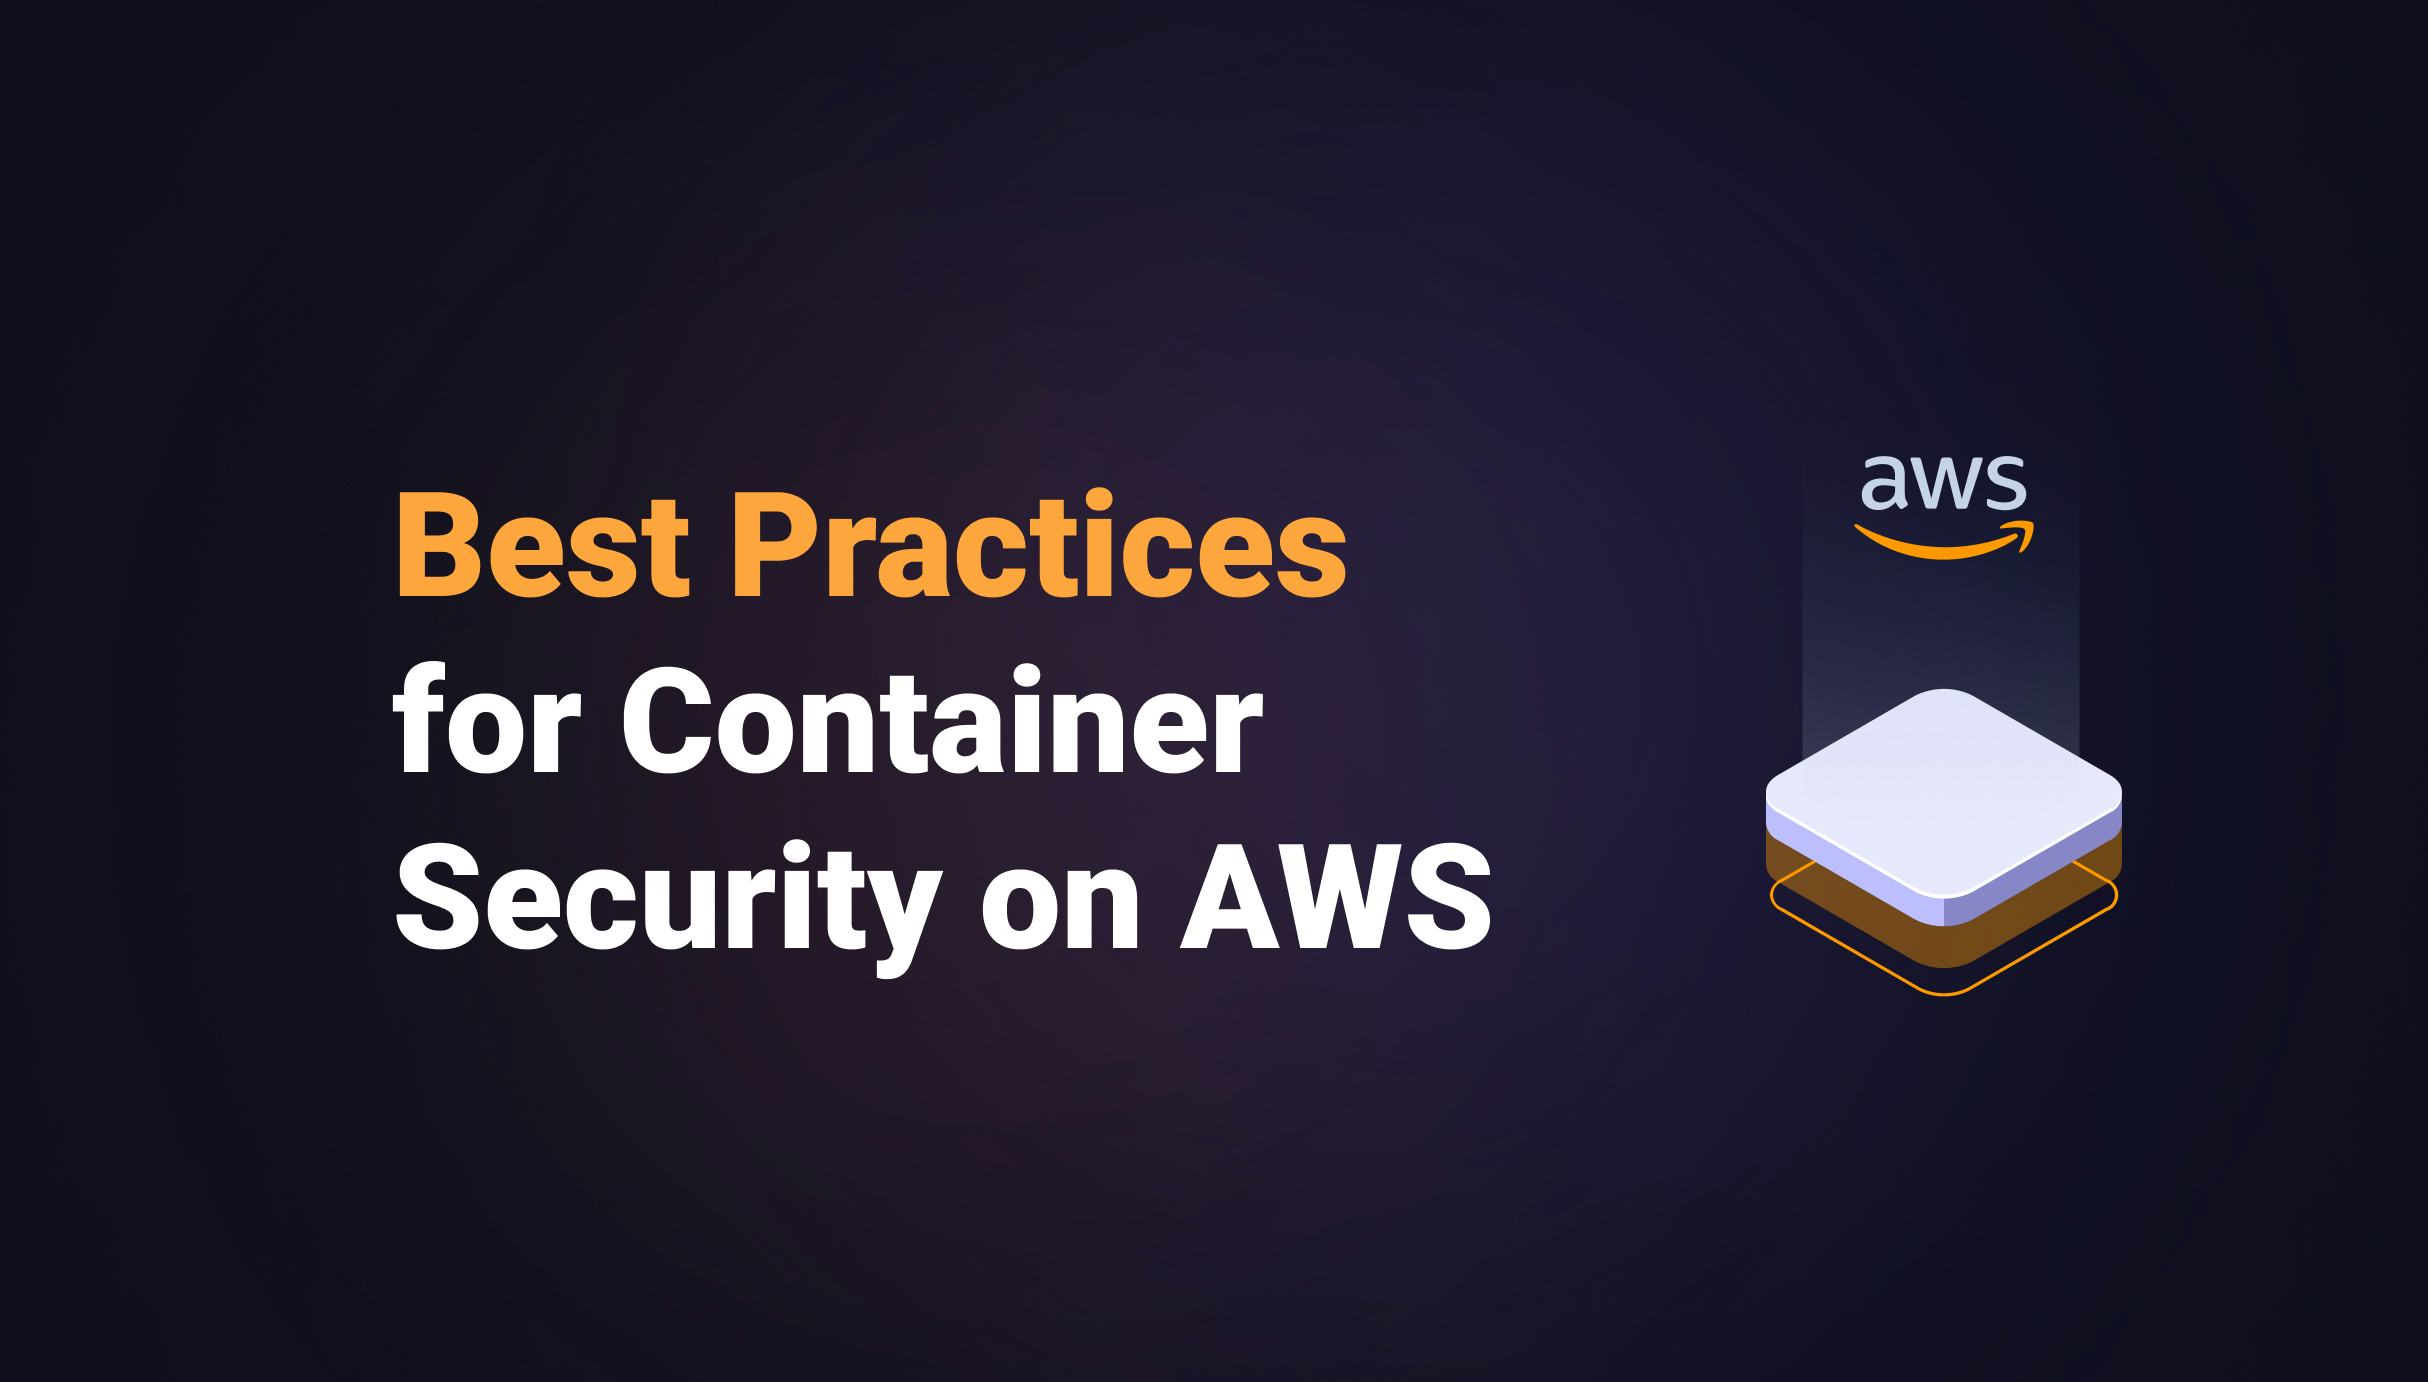 Best Practices for Container Security on AWS - Qovery